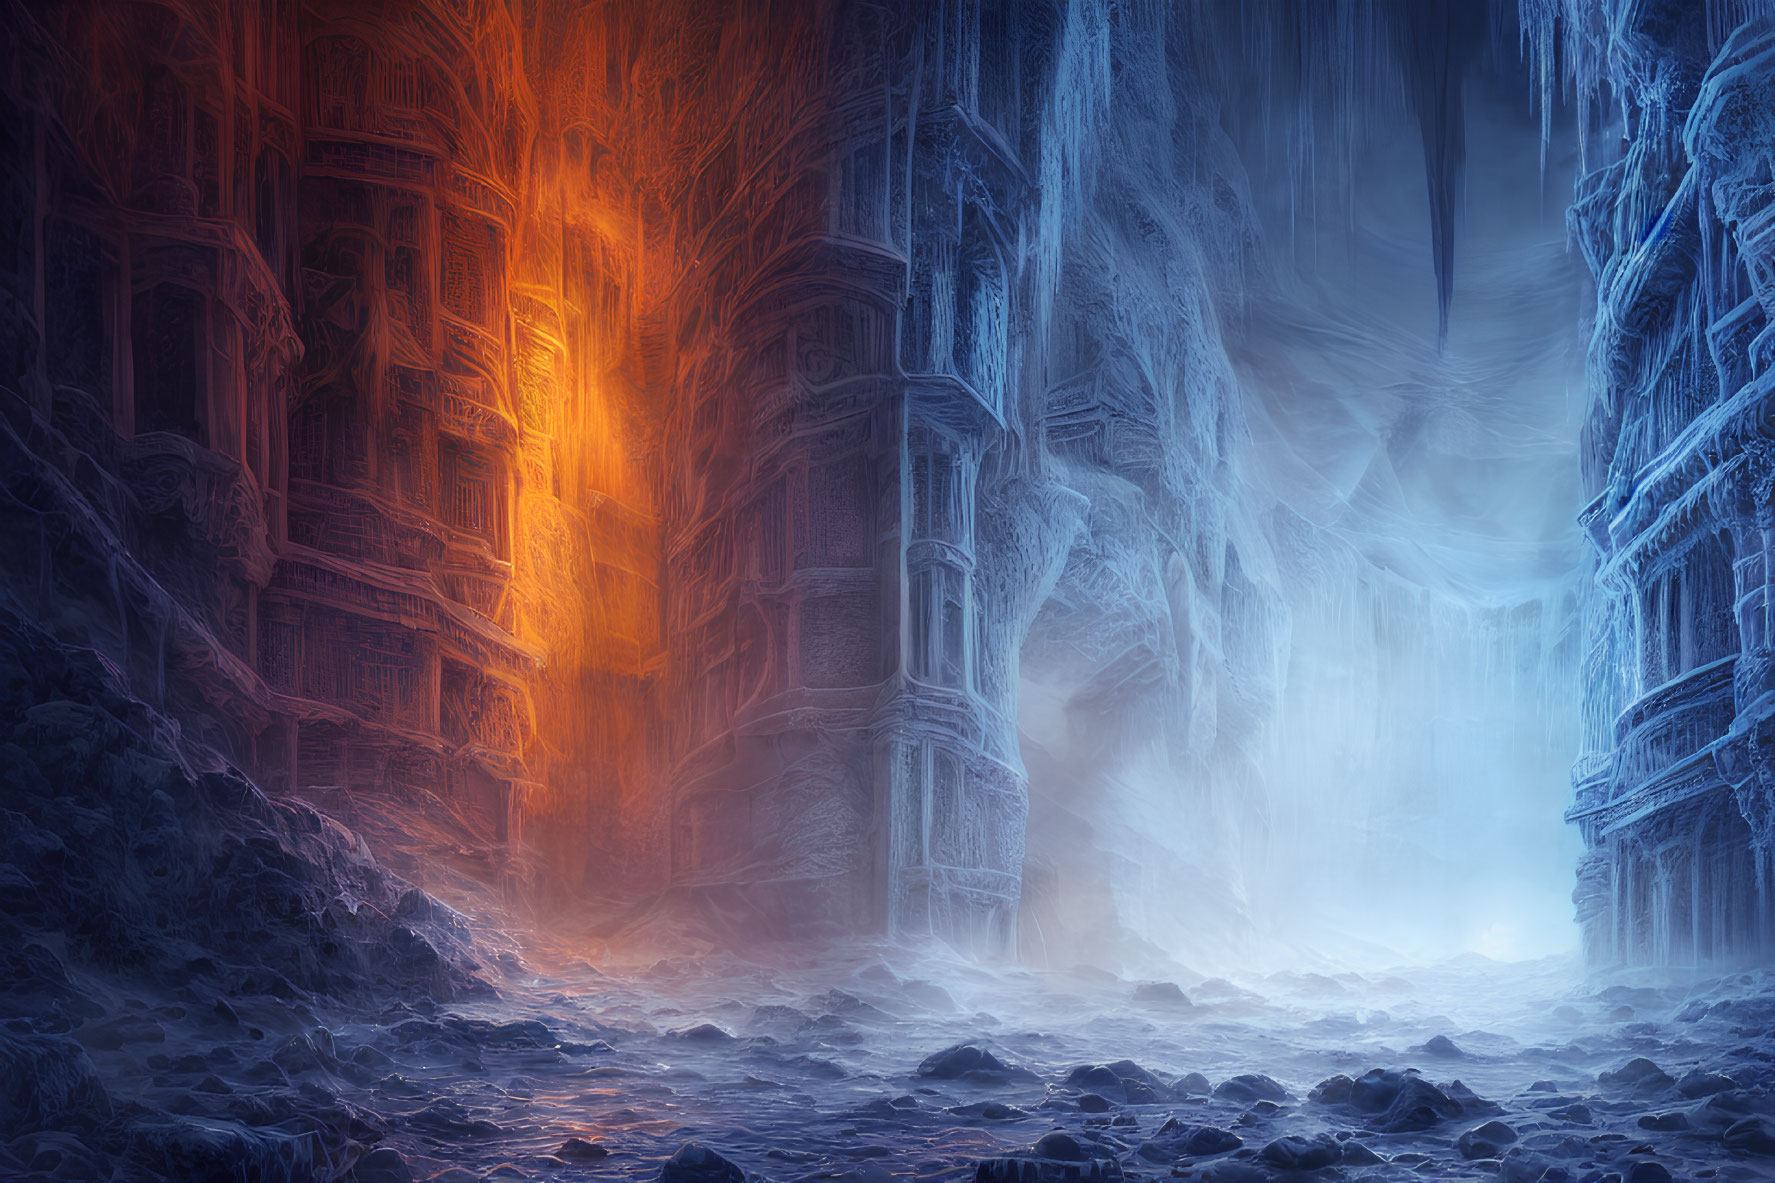 Mystical frozen cavern with intricate ice formations and warm glowing light